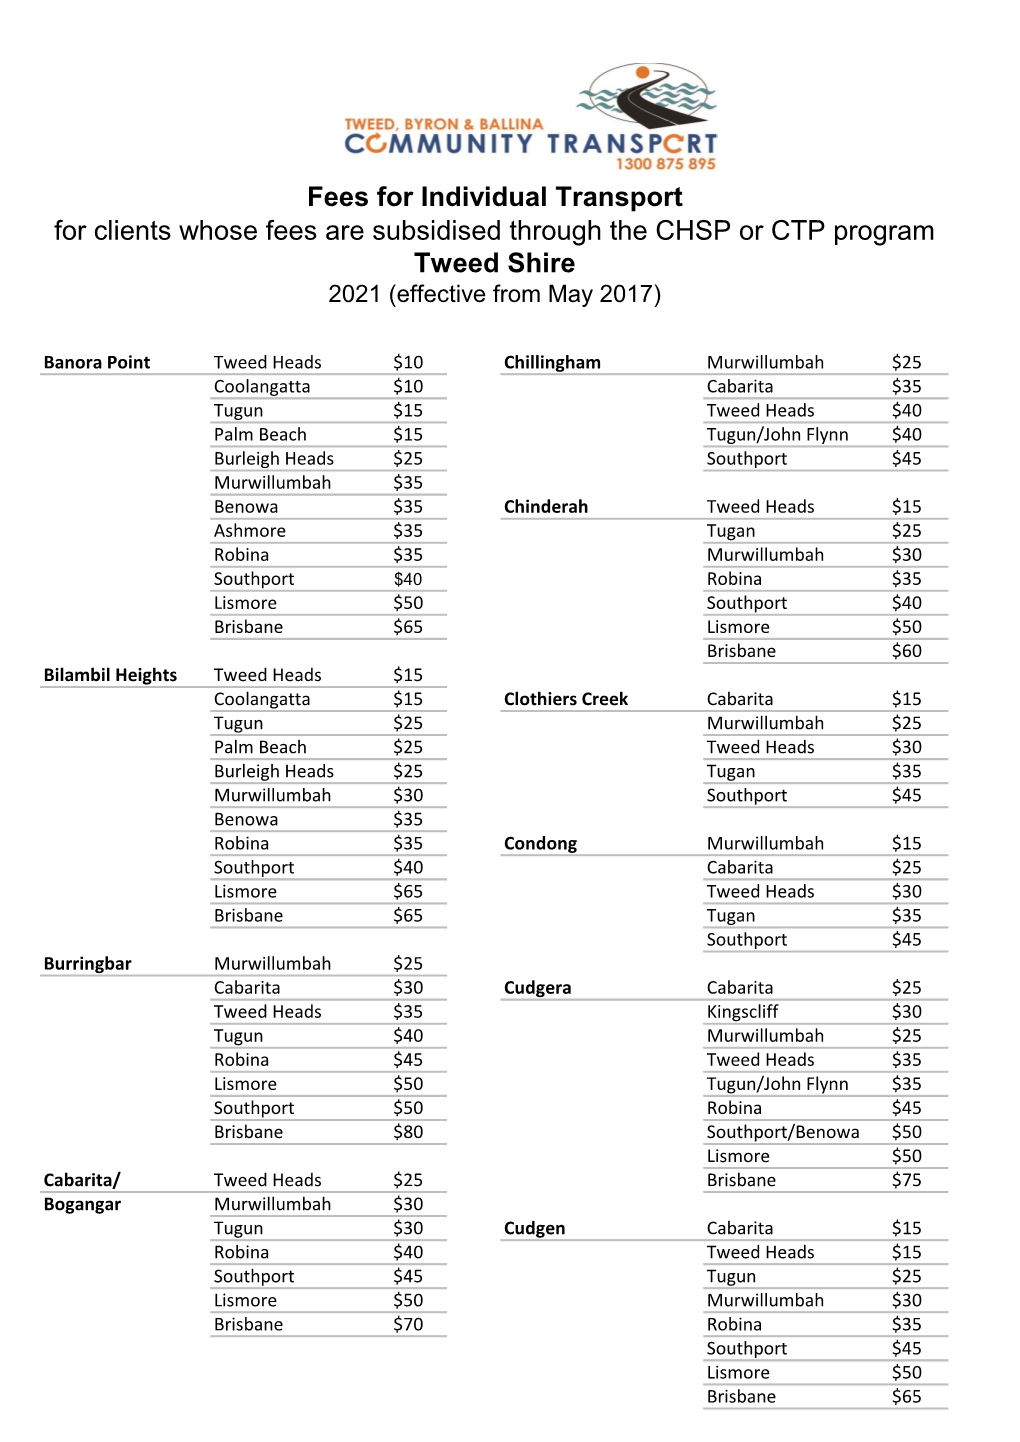 Tweed Shire Fees for CHSP and CTP Clients